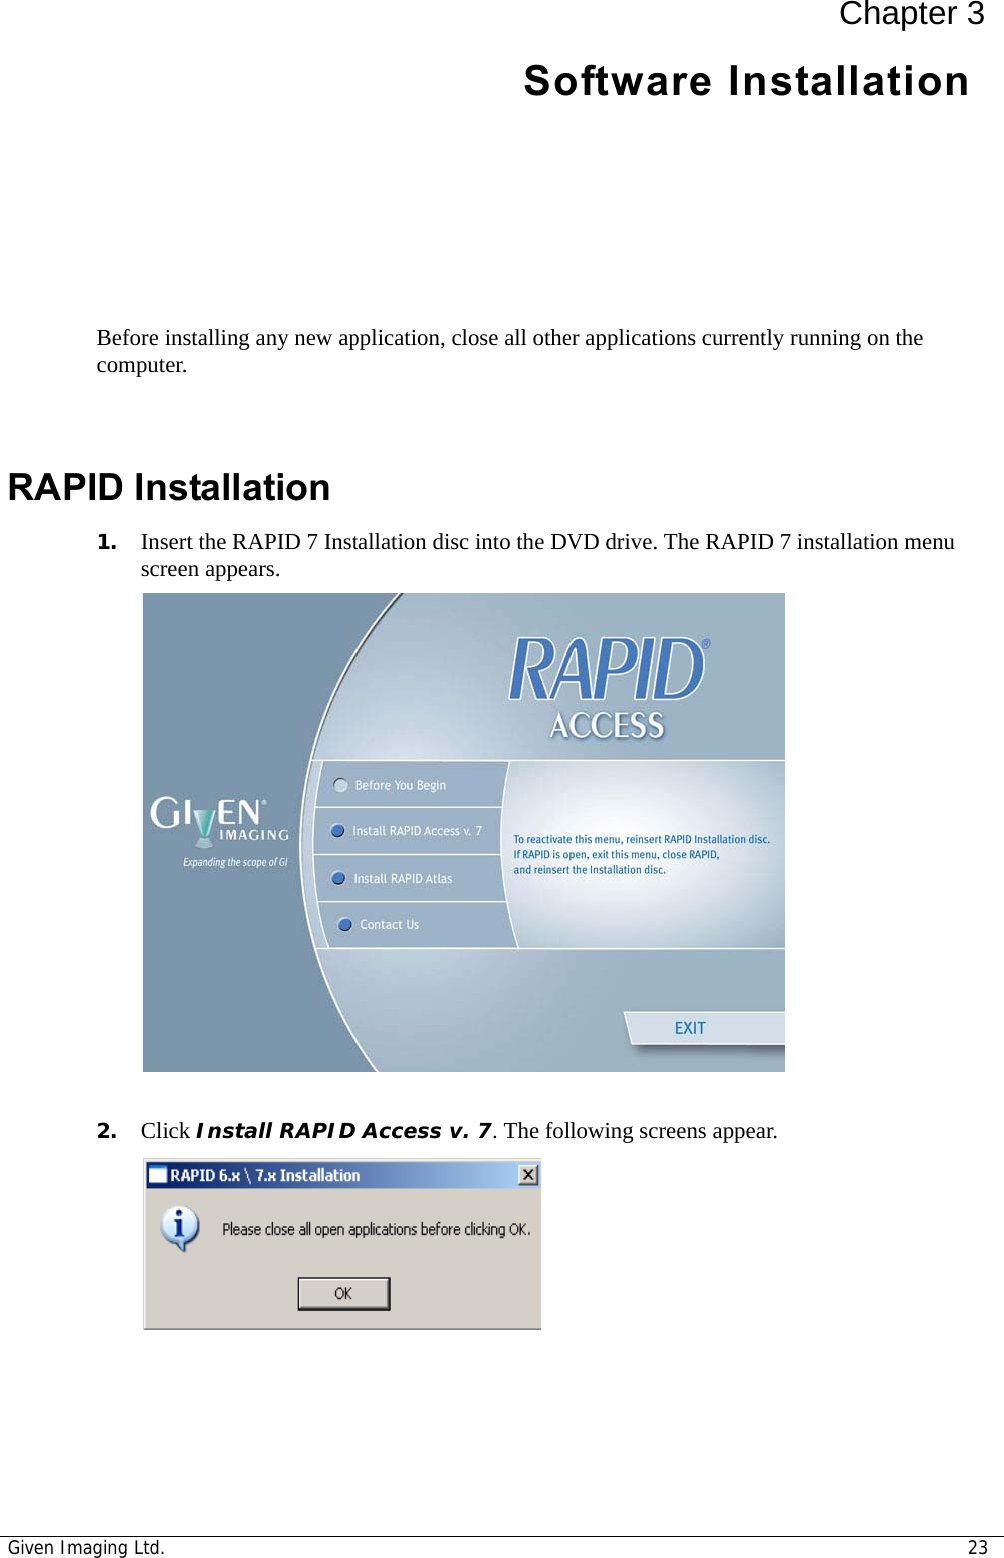 Given Imaging Ltd. 23Chapter 3Software Installation Before installing any new application, close all other applications currently running on the computer. RAPID Installation1. Insert the RAPID 7 Installation disc into the DVD drive. The RAPID 7 installation menu screen appears.2. Click Install RAPID Access v. 7. The following screens appear.